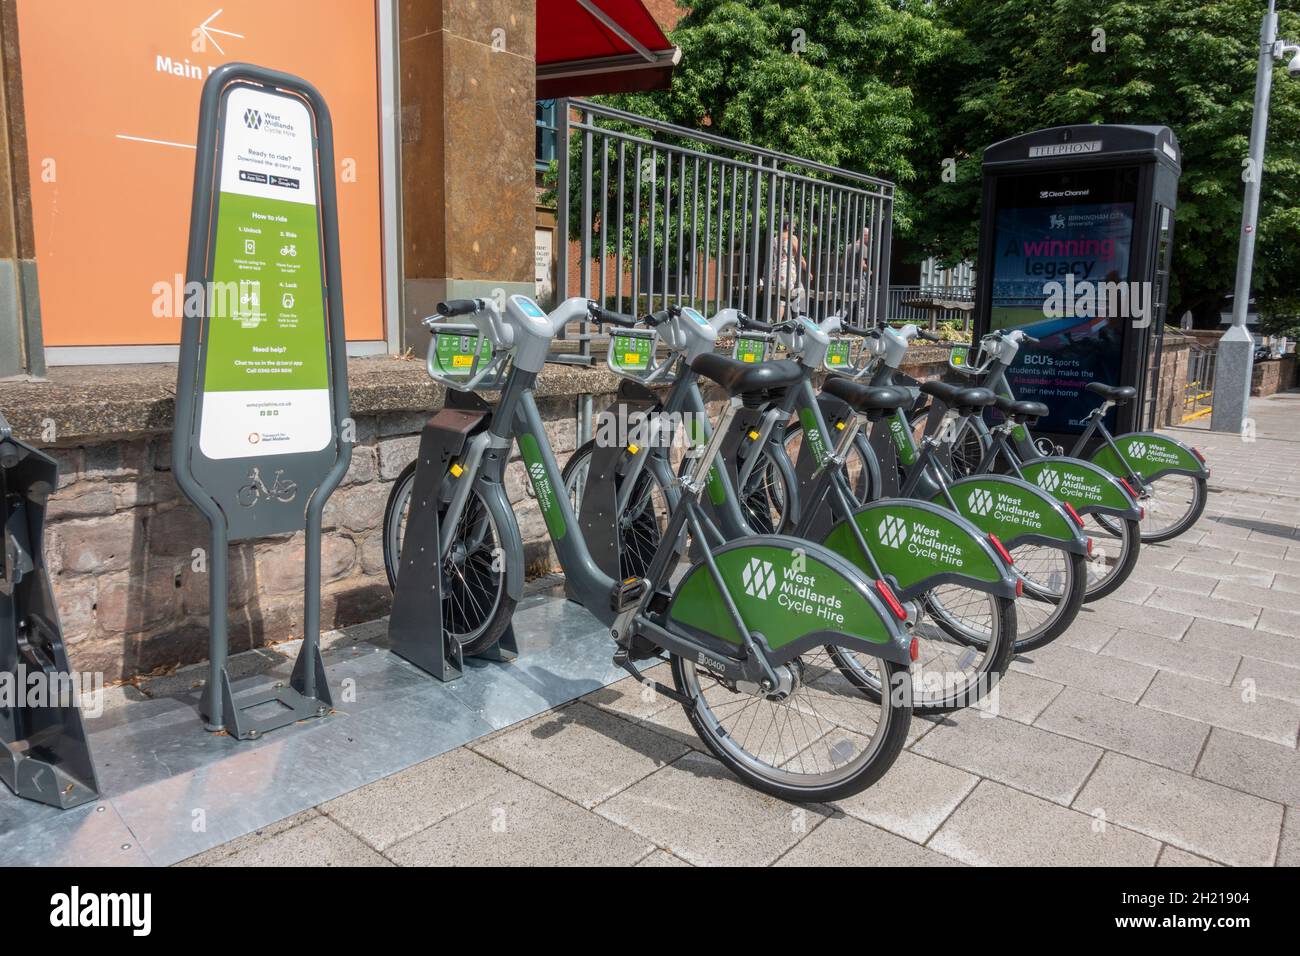 Uno stand West Midlands Cycle Hire a Coventry, West Midlands, Regno Unito. Foto Stock